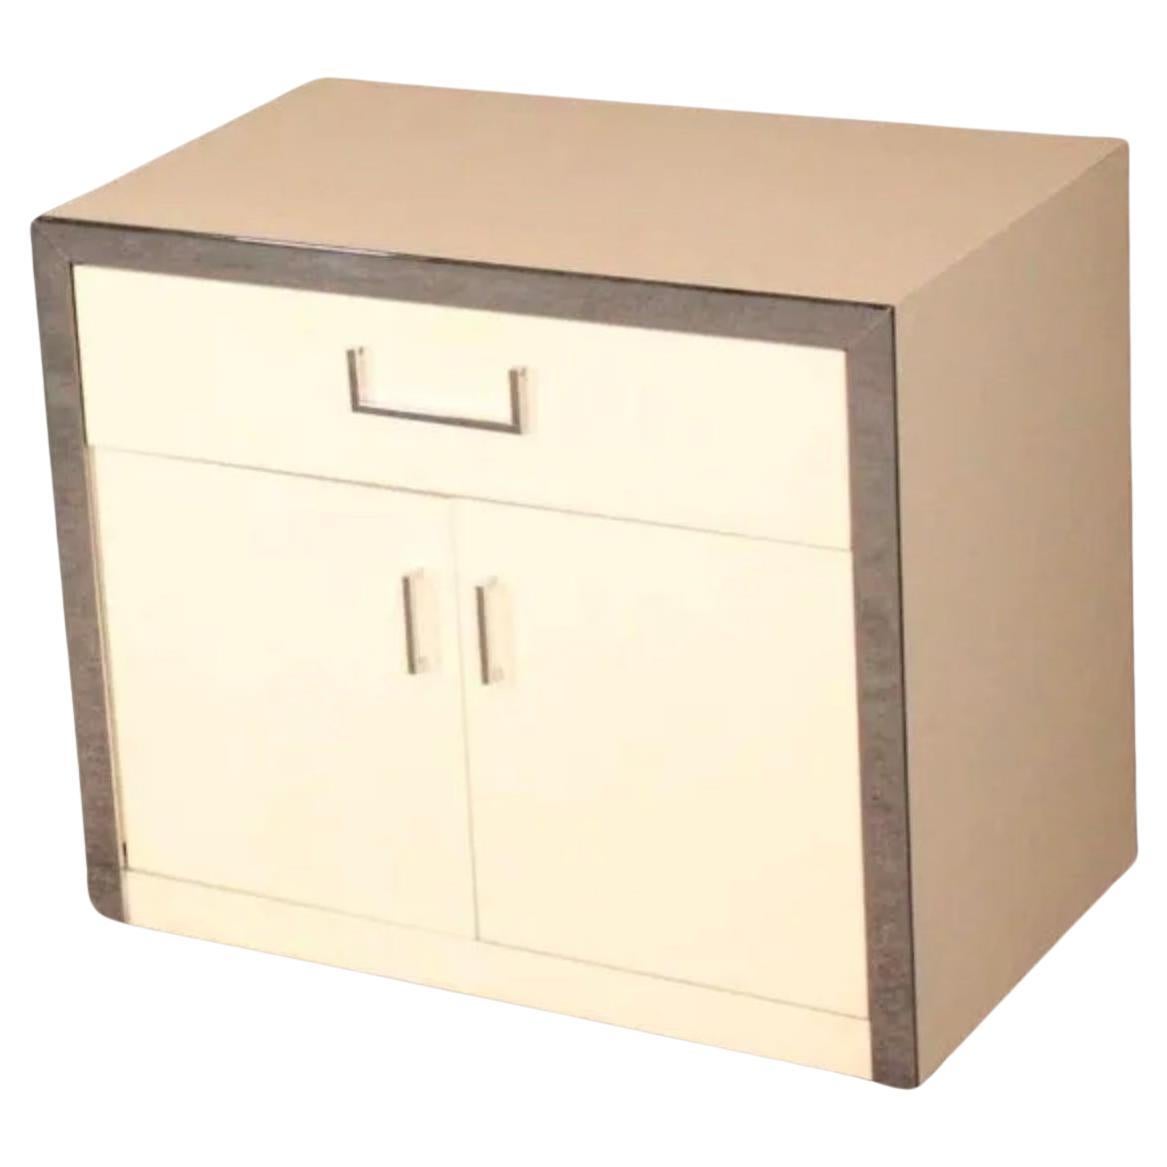 Pair post modern chrome and cream laminate nightstands. Nice Modern nightstands in white with polished chrome fronts and hardware. Labeled John Stuart. Has (1) upper drawer and (2) lower cabinet doors. Good vintage condition Ready for